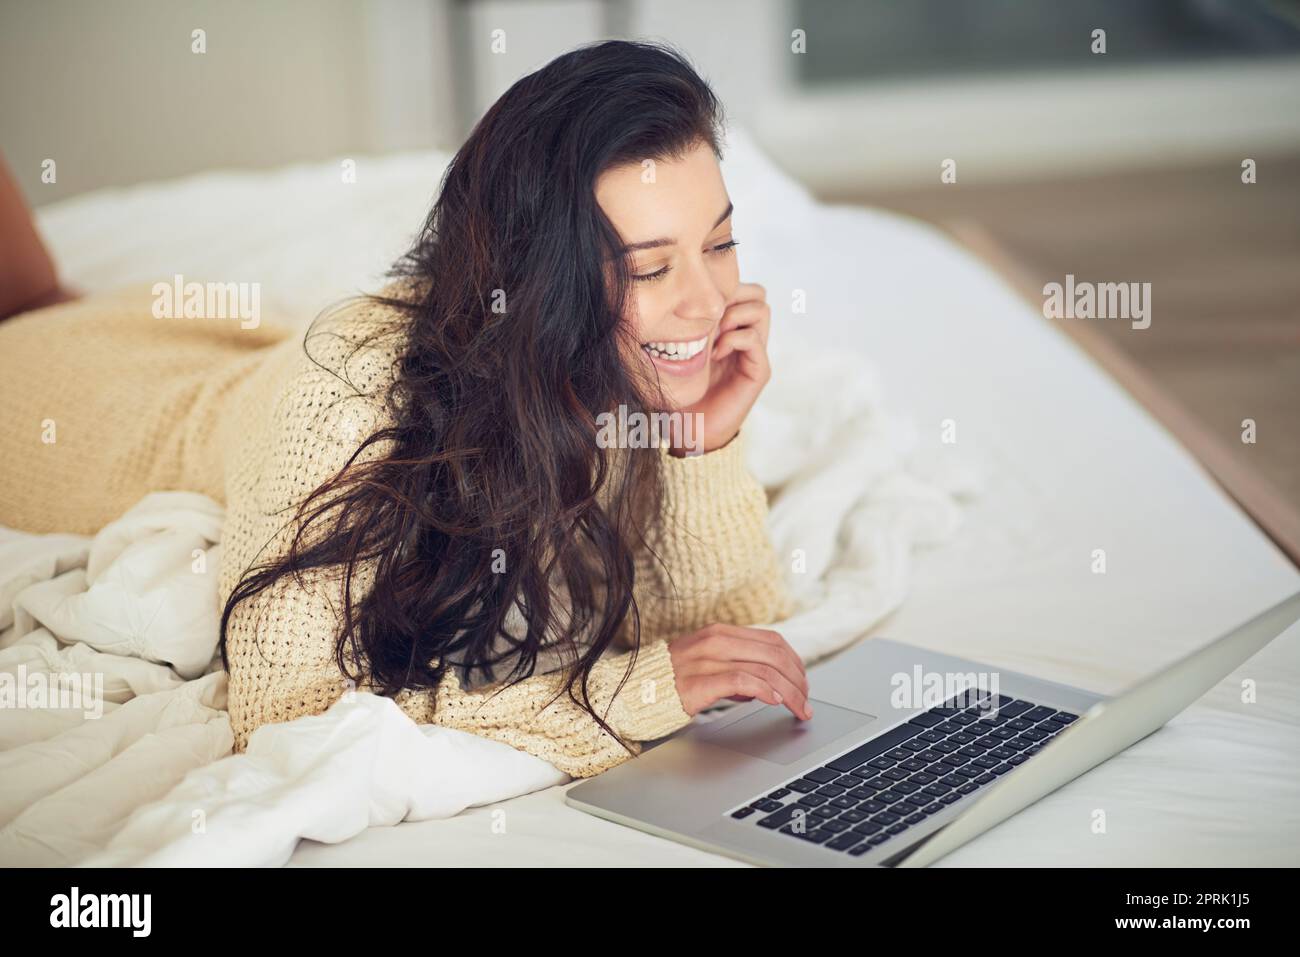 Doing some blogging. a young woman using her laptop while lying on her bed. Stock Photo